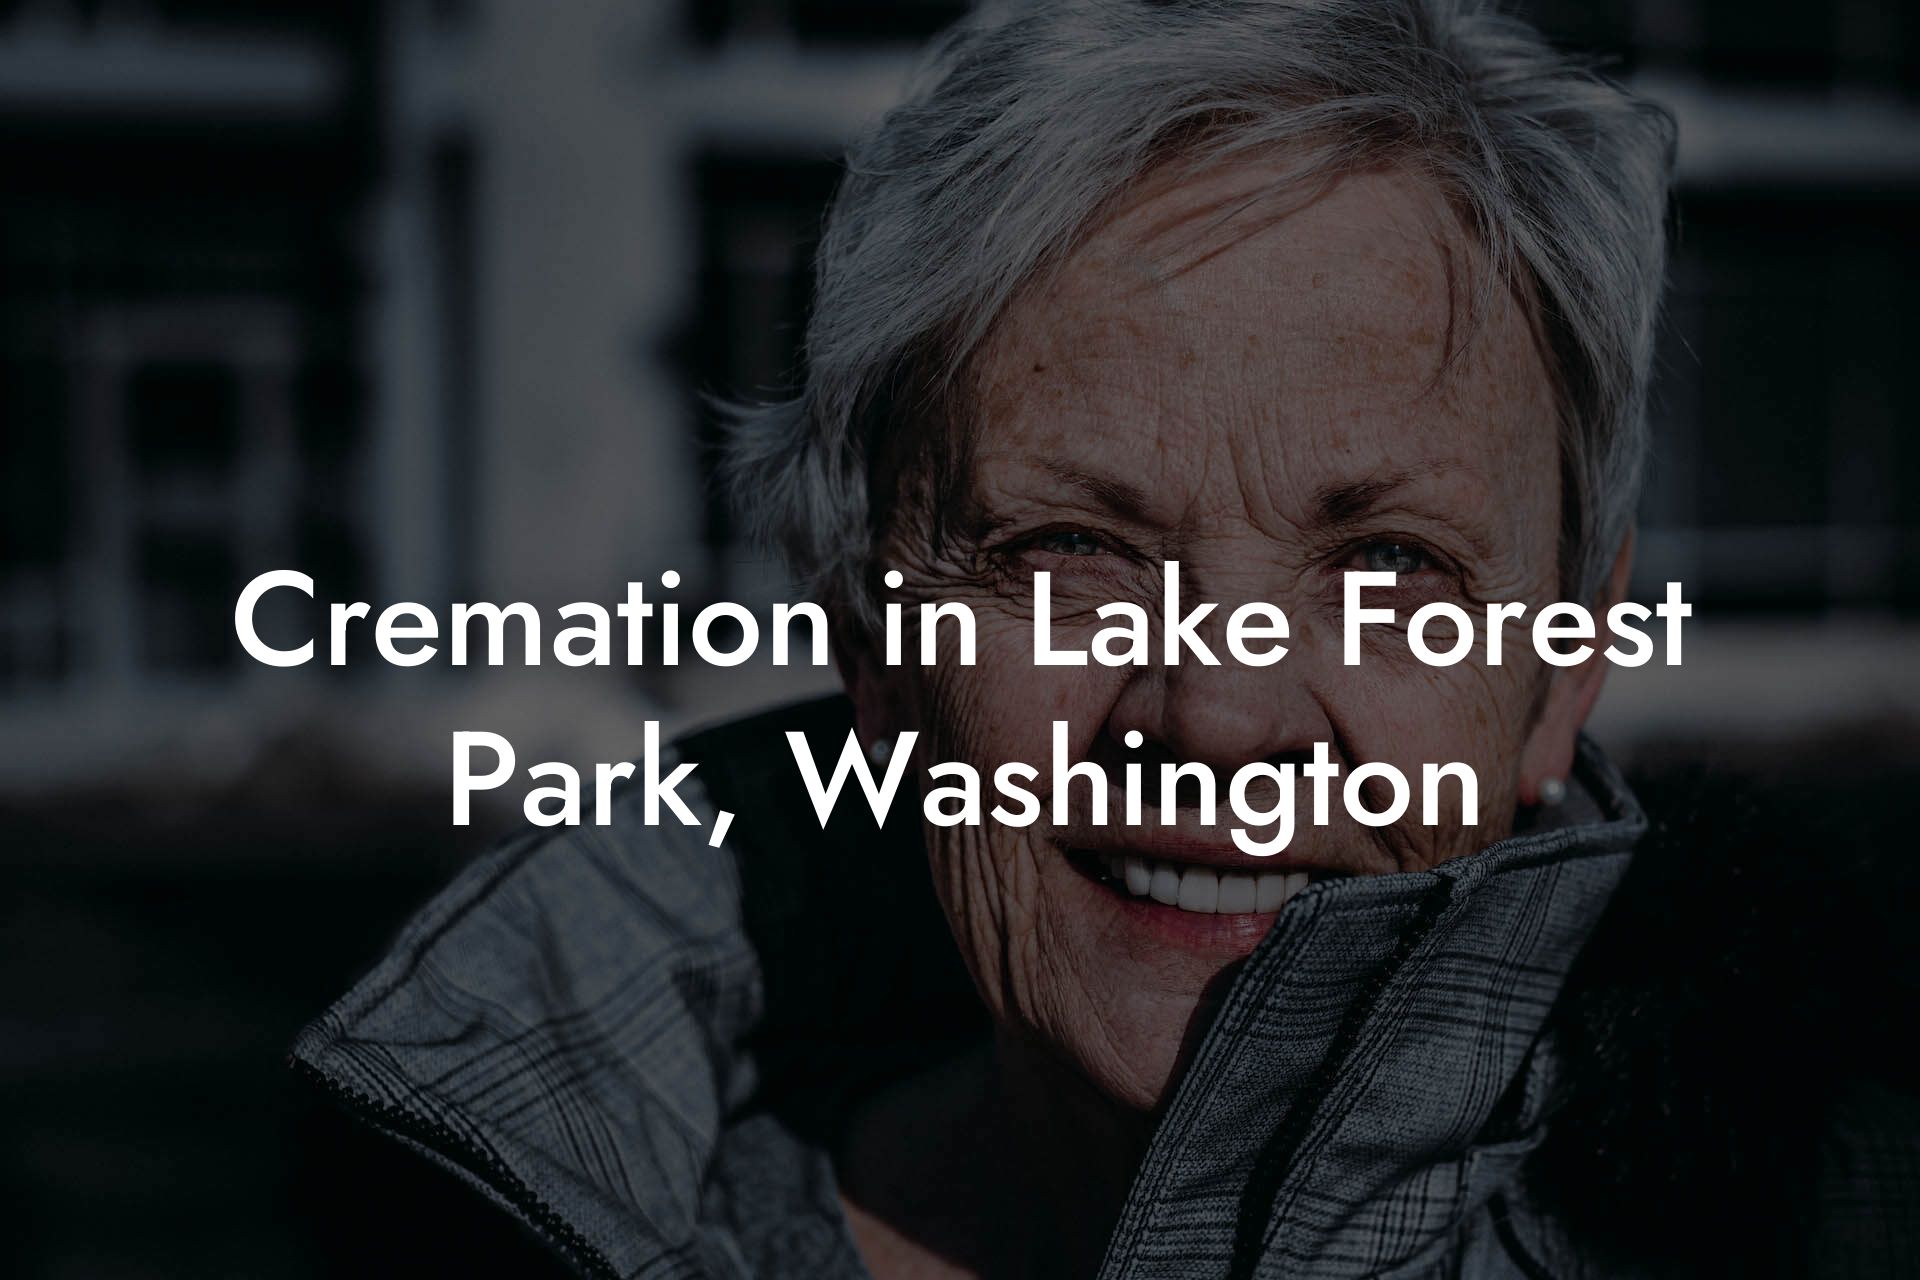 Cremation in Lake Forest Park, Washington